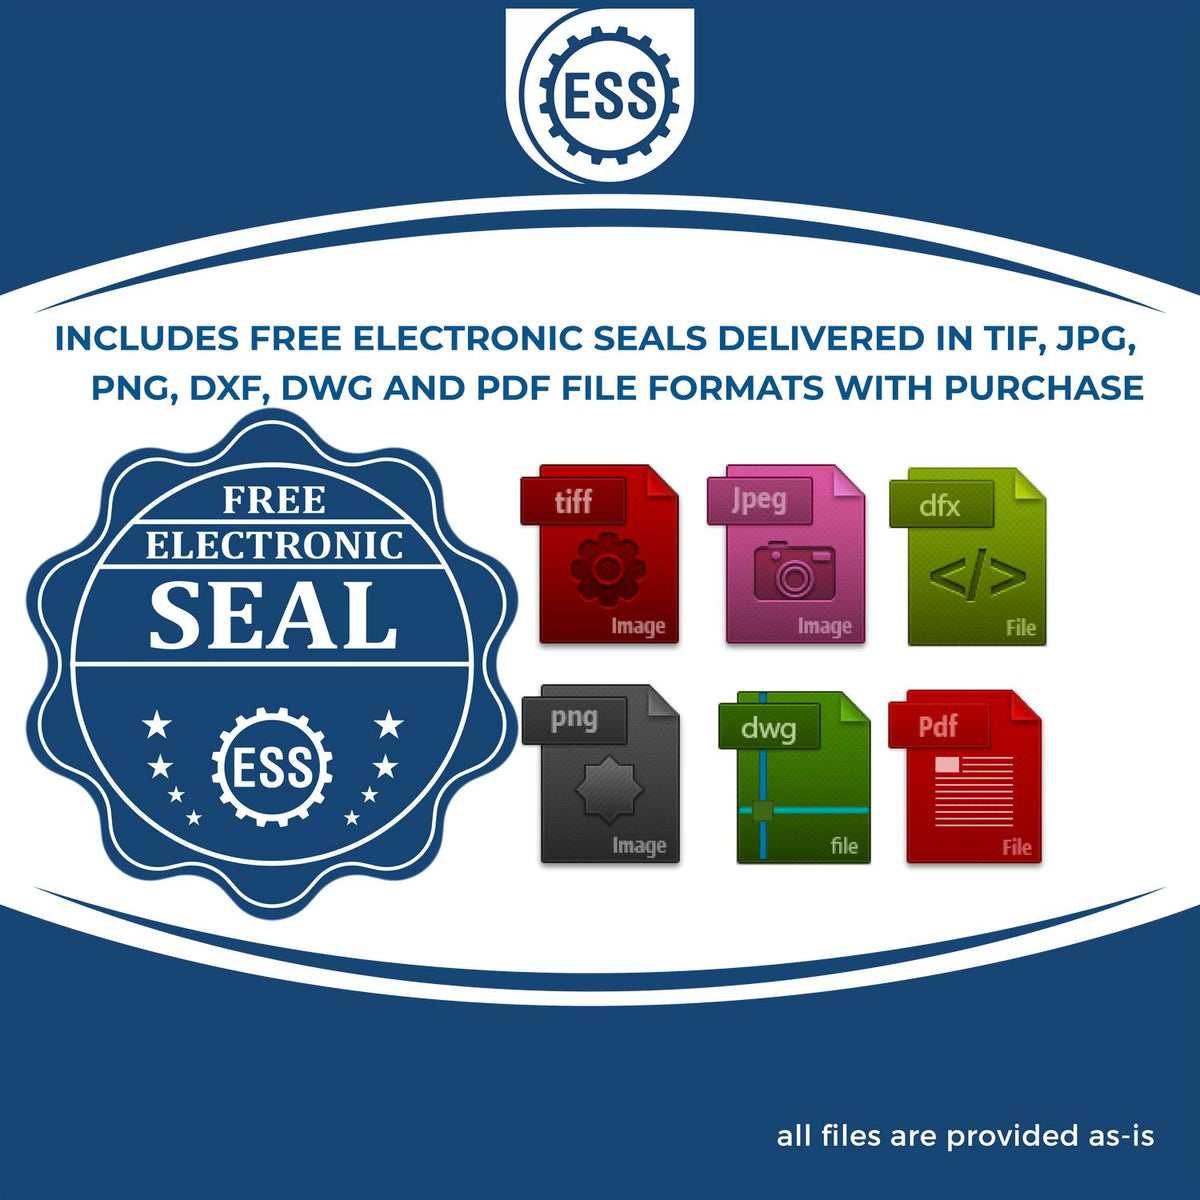 An infographic for the free electronic seal for the Hybrid Connecticut Architect Seal illustrating the different file type icons such as DXF, DWG, TIF, JPG and PNG.